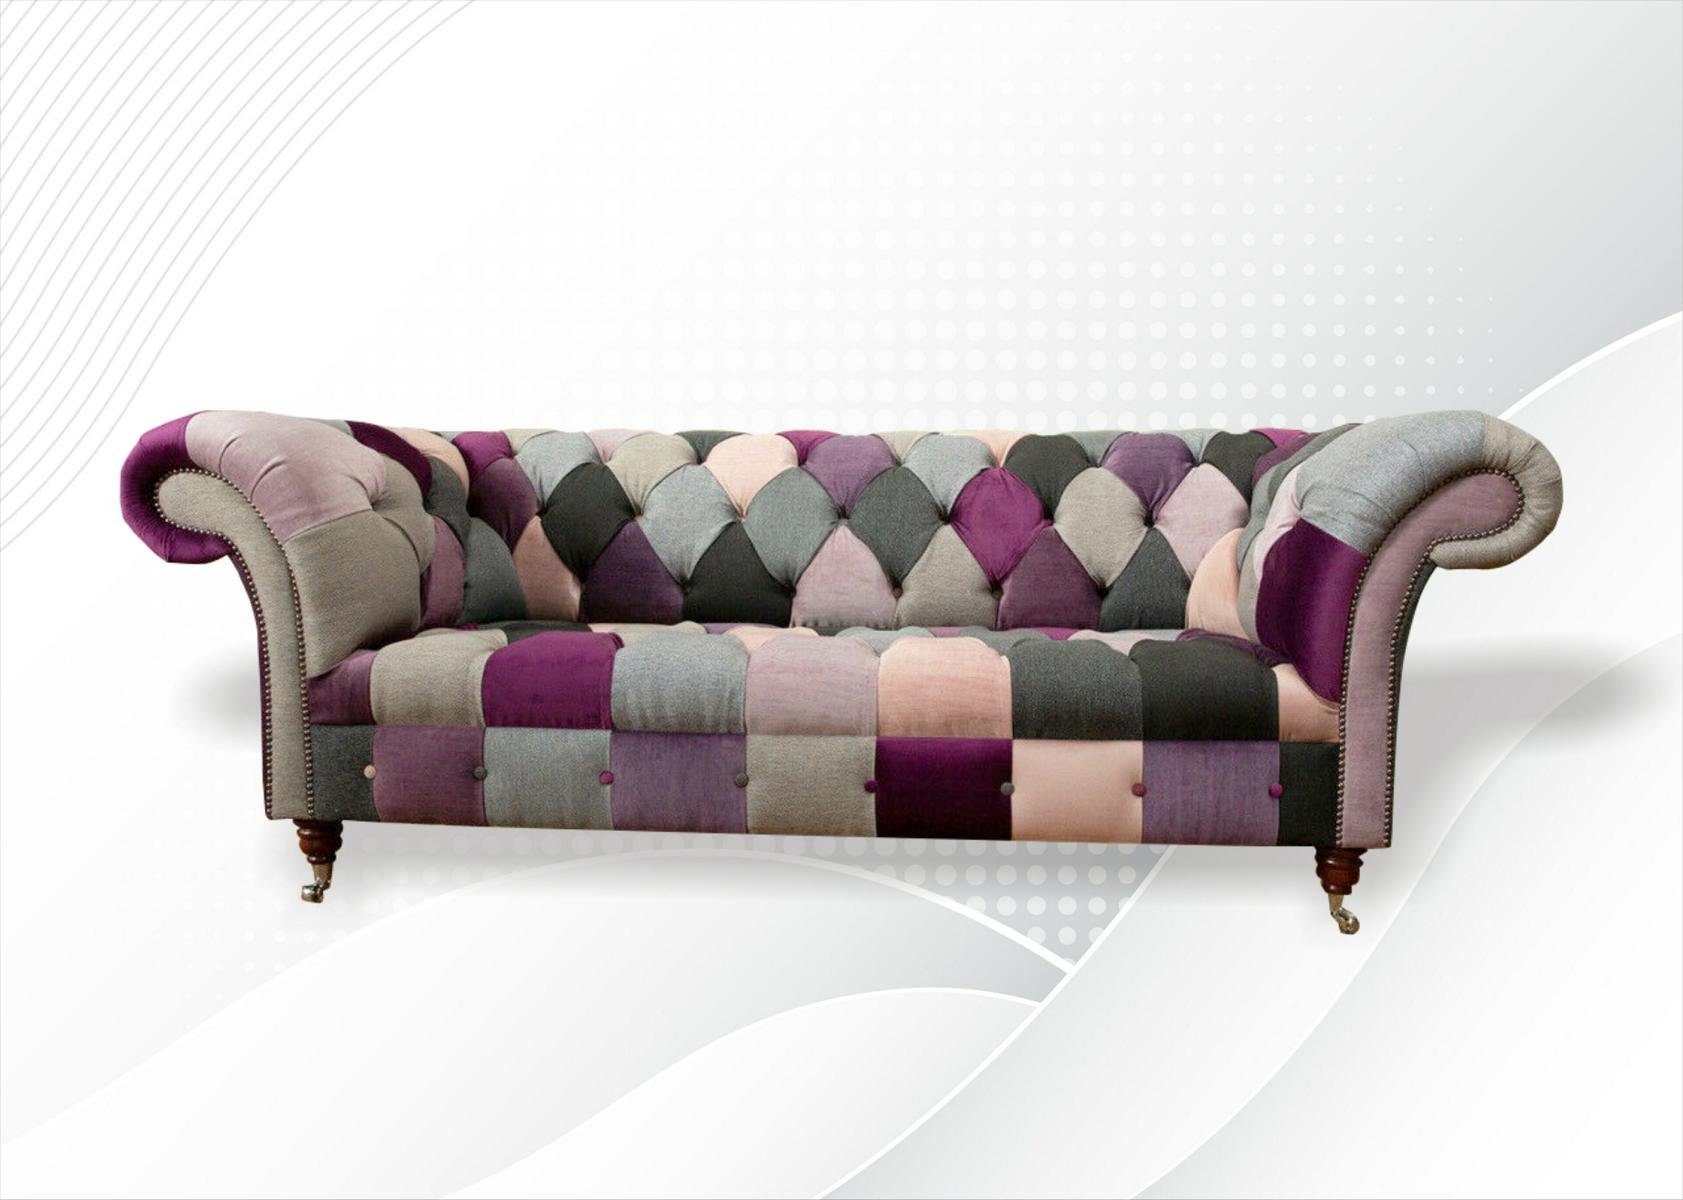 JVmoebel Chesterfield-Sofa Chesterfield 3 Sitzer Design Sofa Couch 225 cm, Made in Europe